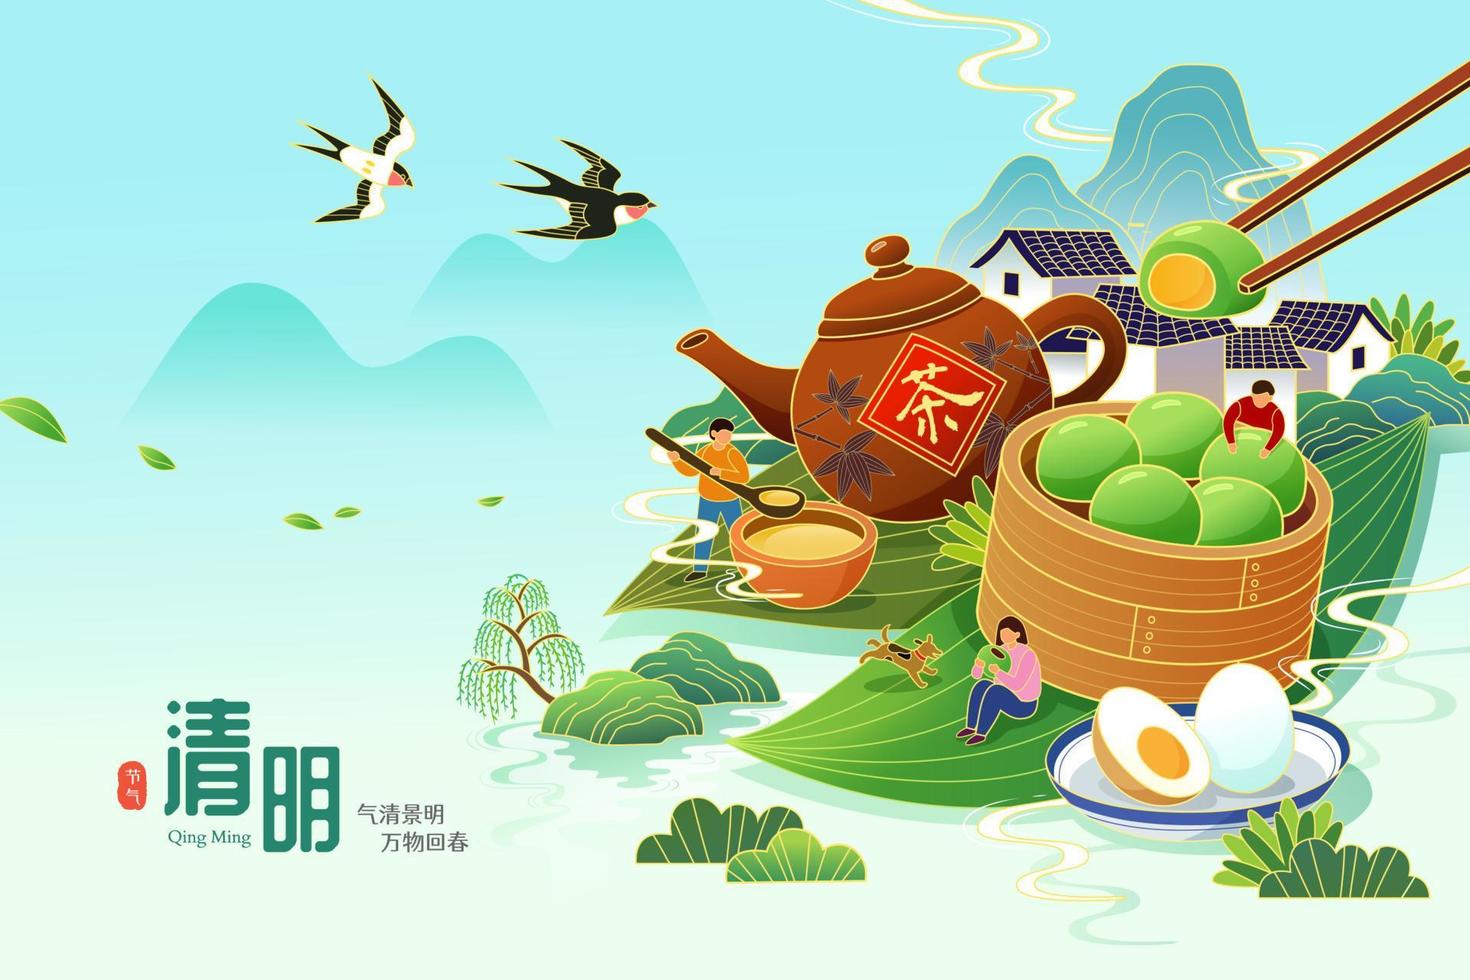 Asians eating cold food such as green rice balls, boiled eggs during Qing Ming Festival. Translation, Qingming Festival. The clearness and brightness of spring scenery bring all things back to life. vector